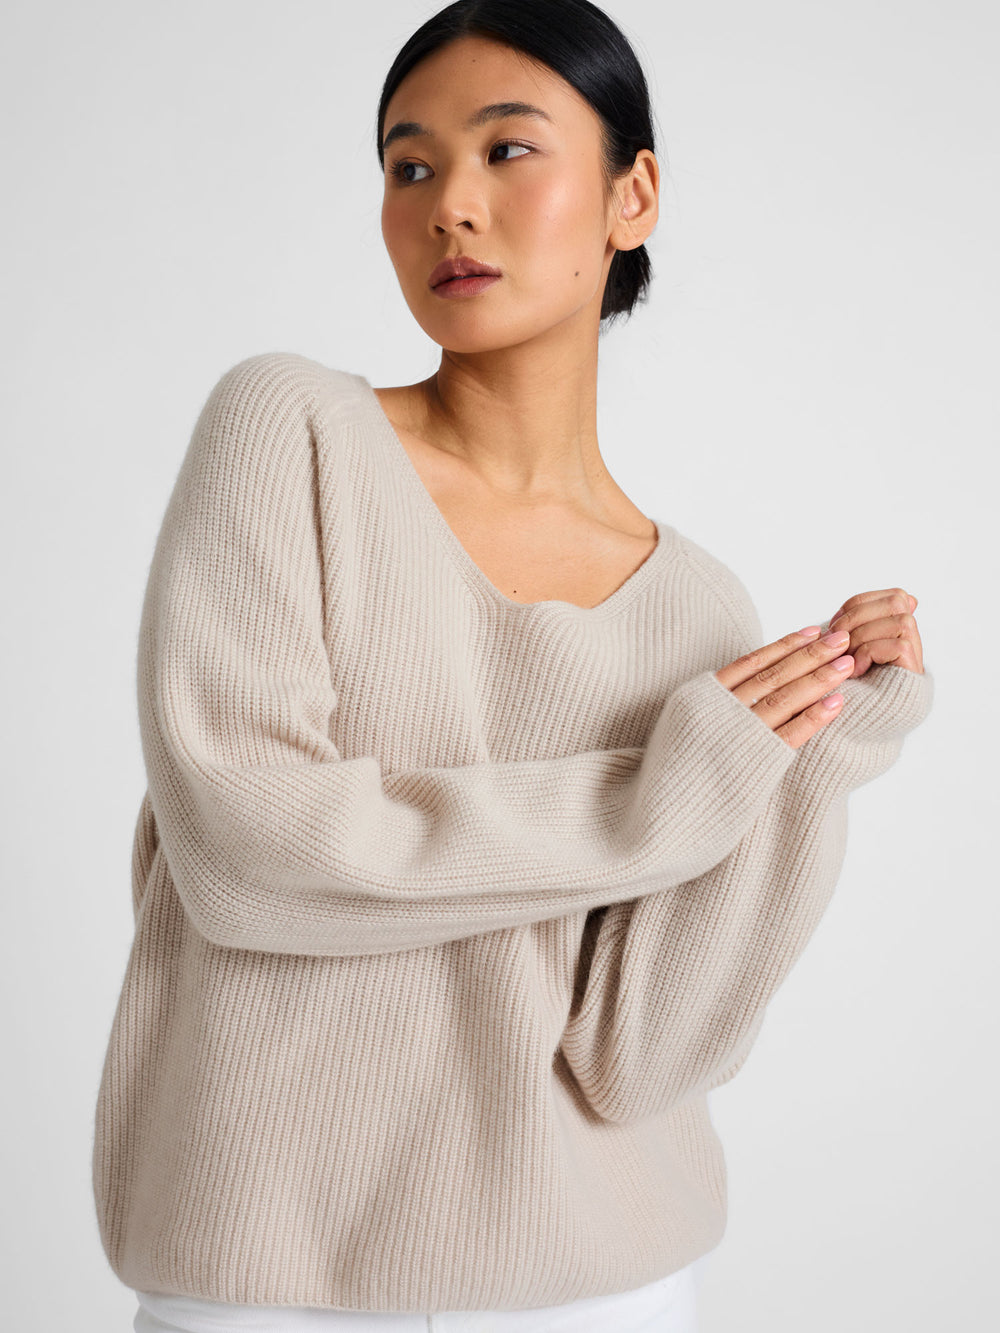 Rib knitted V-neck cashmere sweater in color: Creme. 100% cashmere, Scandinavian design by Kashmina.